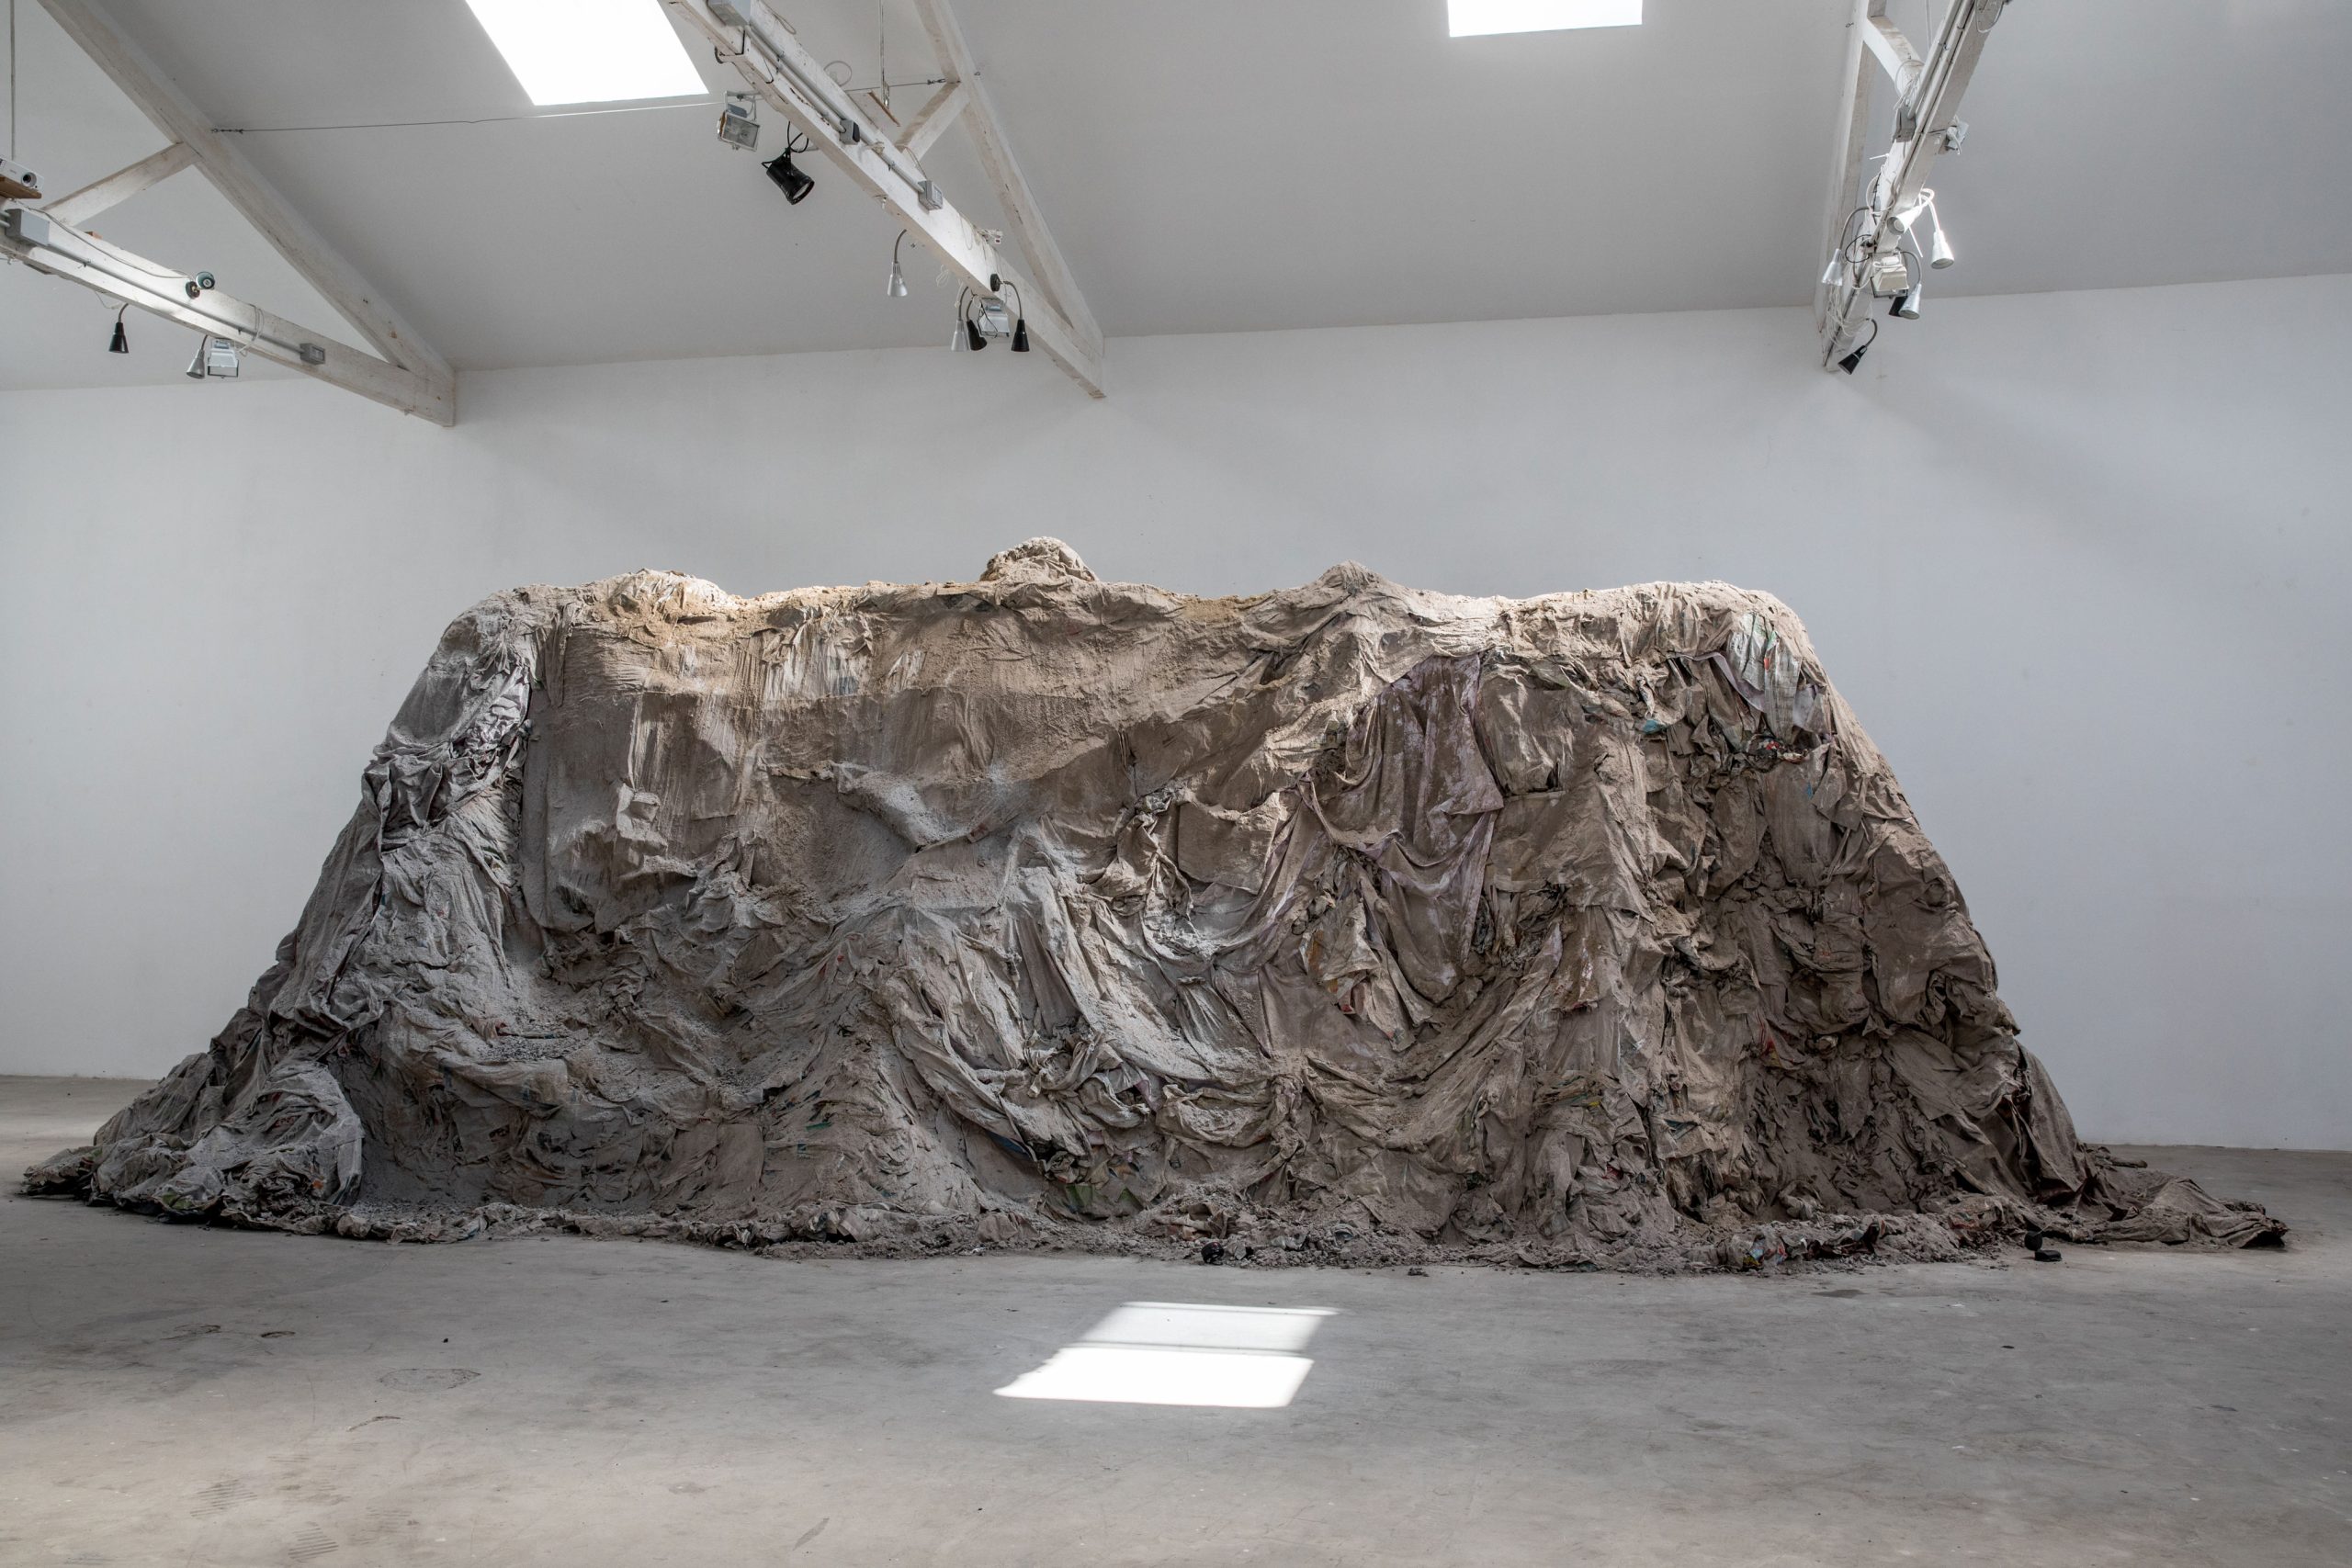 St Elias Hill, 2018, 500kg of ash collected from Barcelona, glue, paper mache, wood and mesh, 276 x 820 x 320 cm. Photo by Vitor Schietti